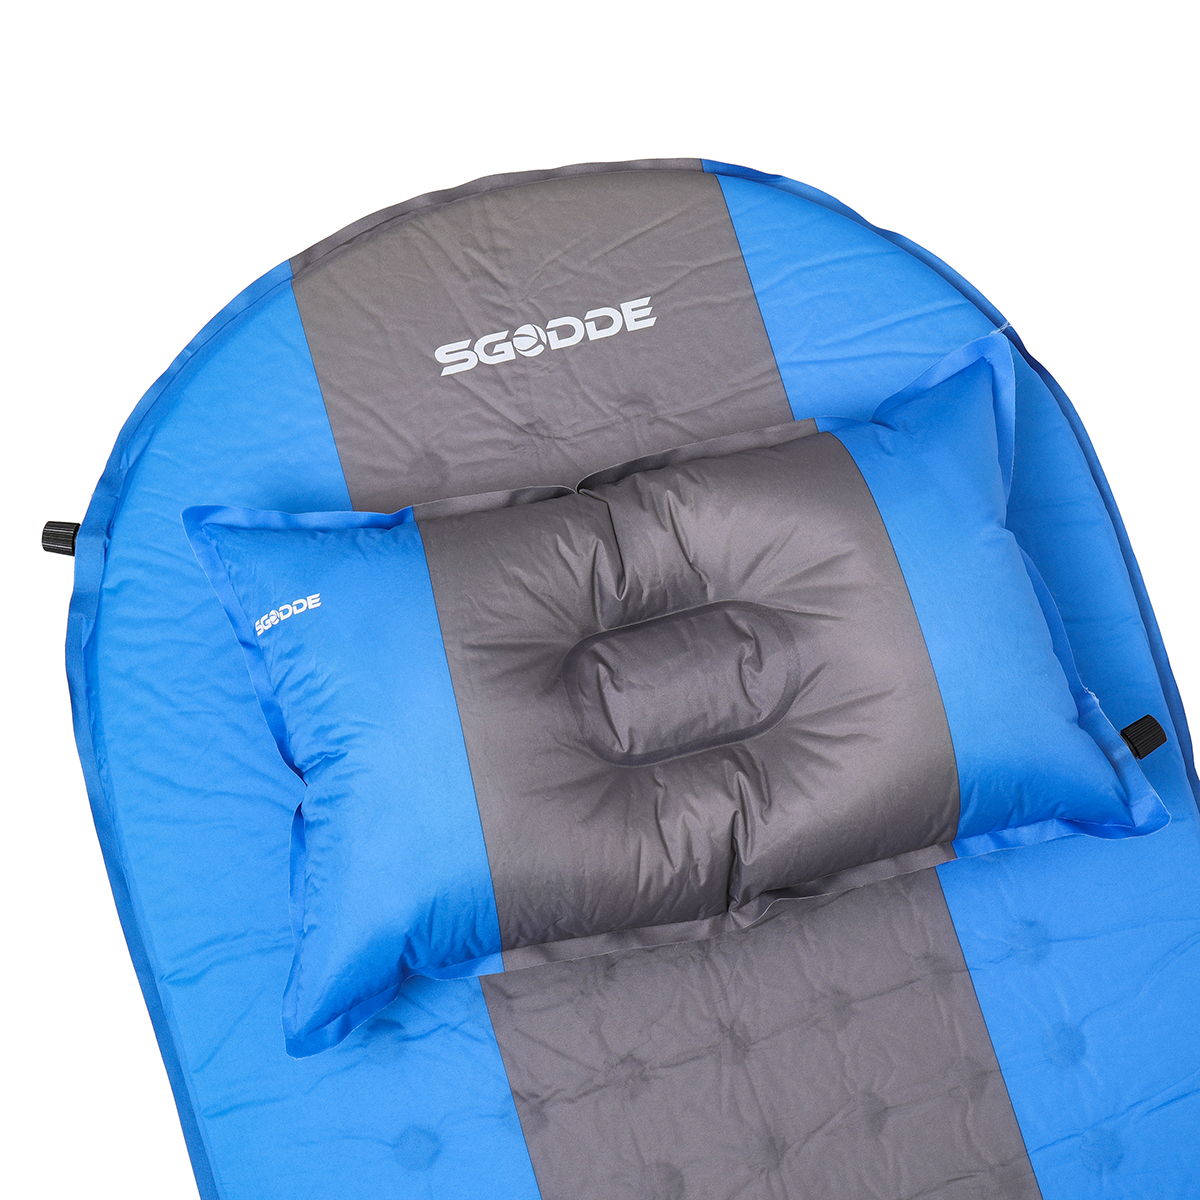 SGODDE-Inflatable-Sleeping-Mat-with-Pillow-Self-Inflating-Sleeping-Pad-Roll-Up-Foam-Bed-Pads-for-Out-1883996-10